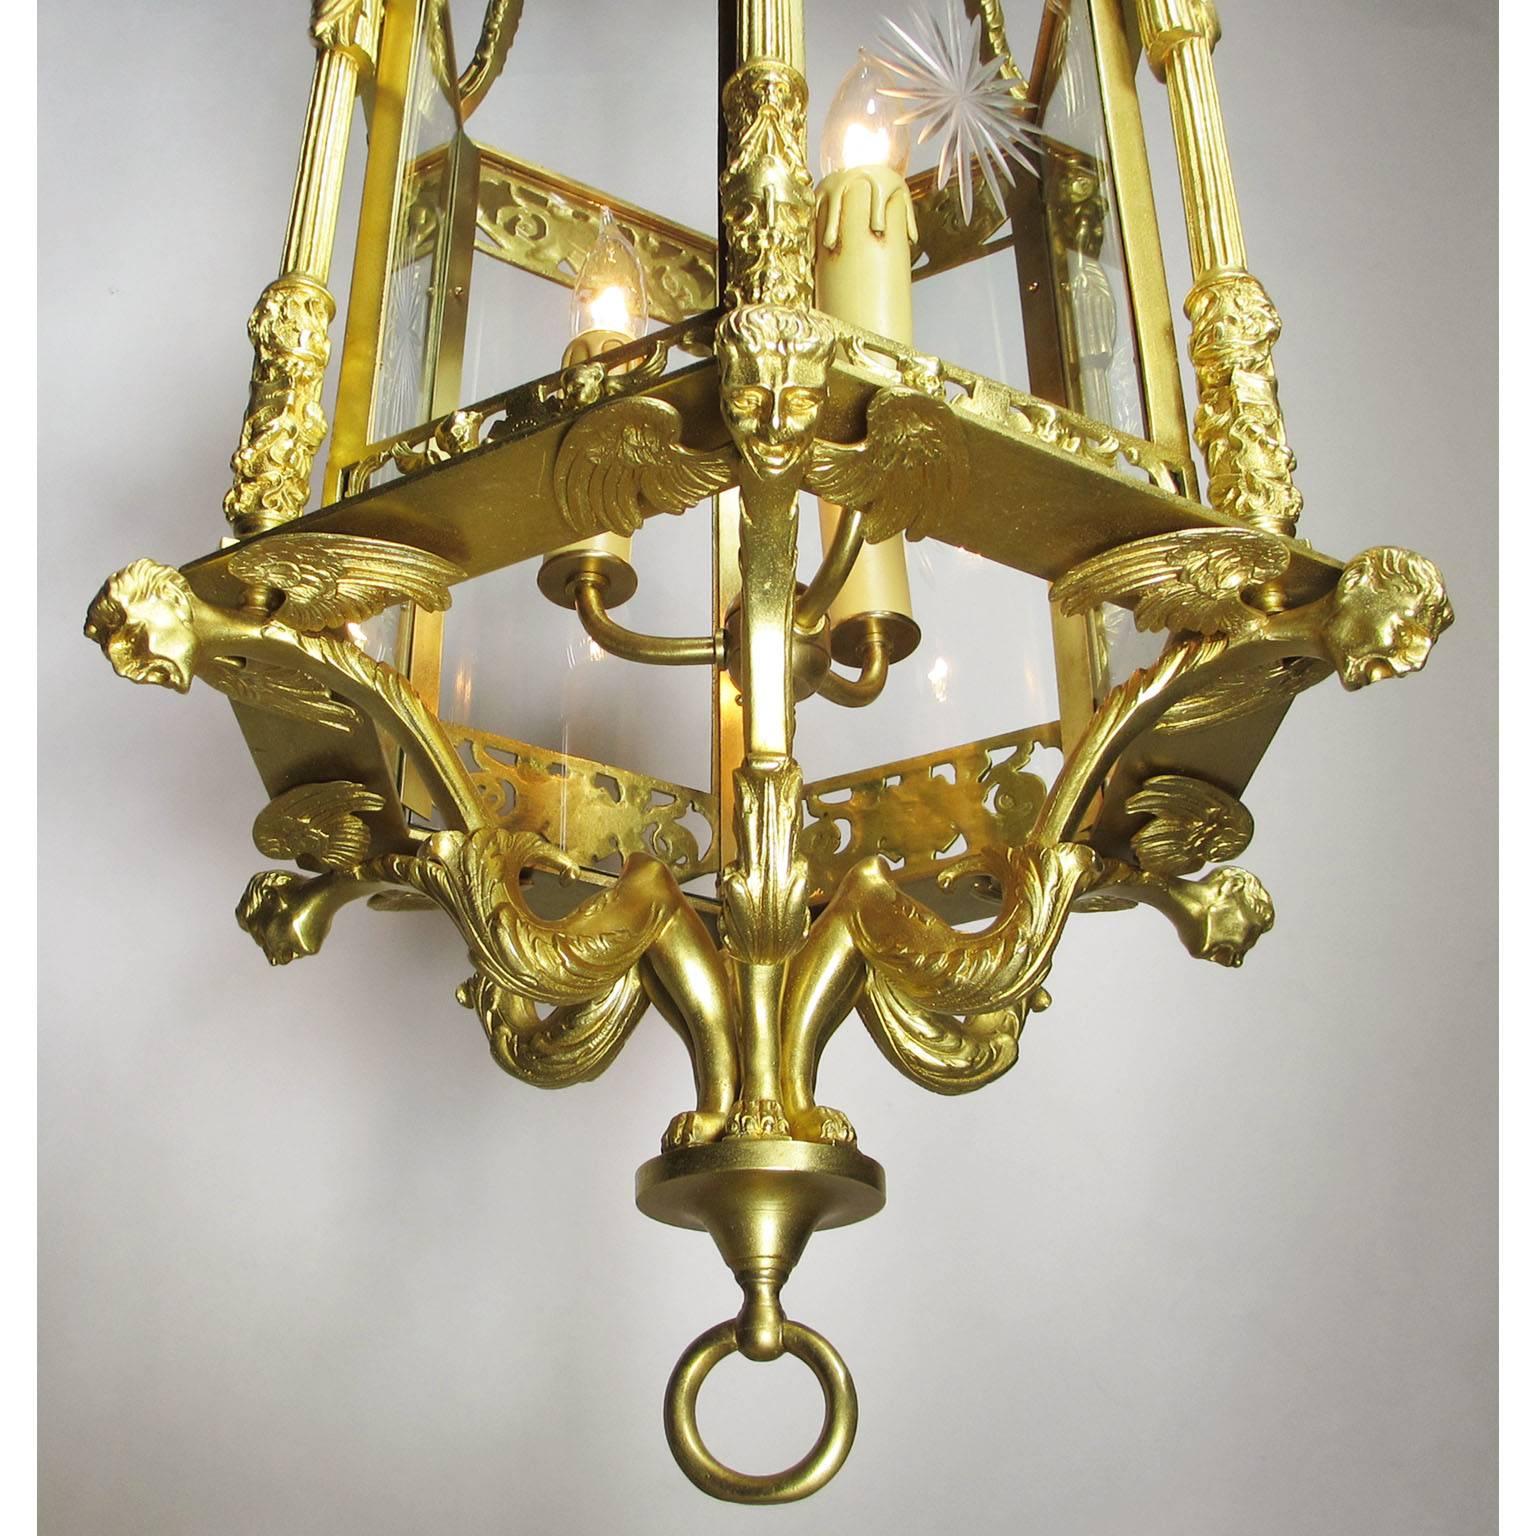 Neoclassical Revival English 19th-20th Century Neoclassical Style Lantern, Attributed to Lenygon For Sale